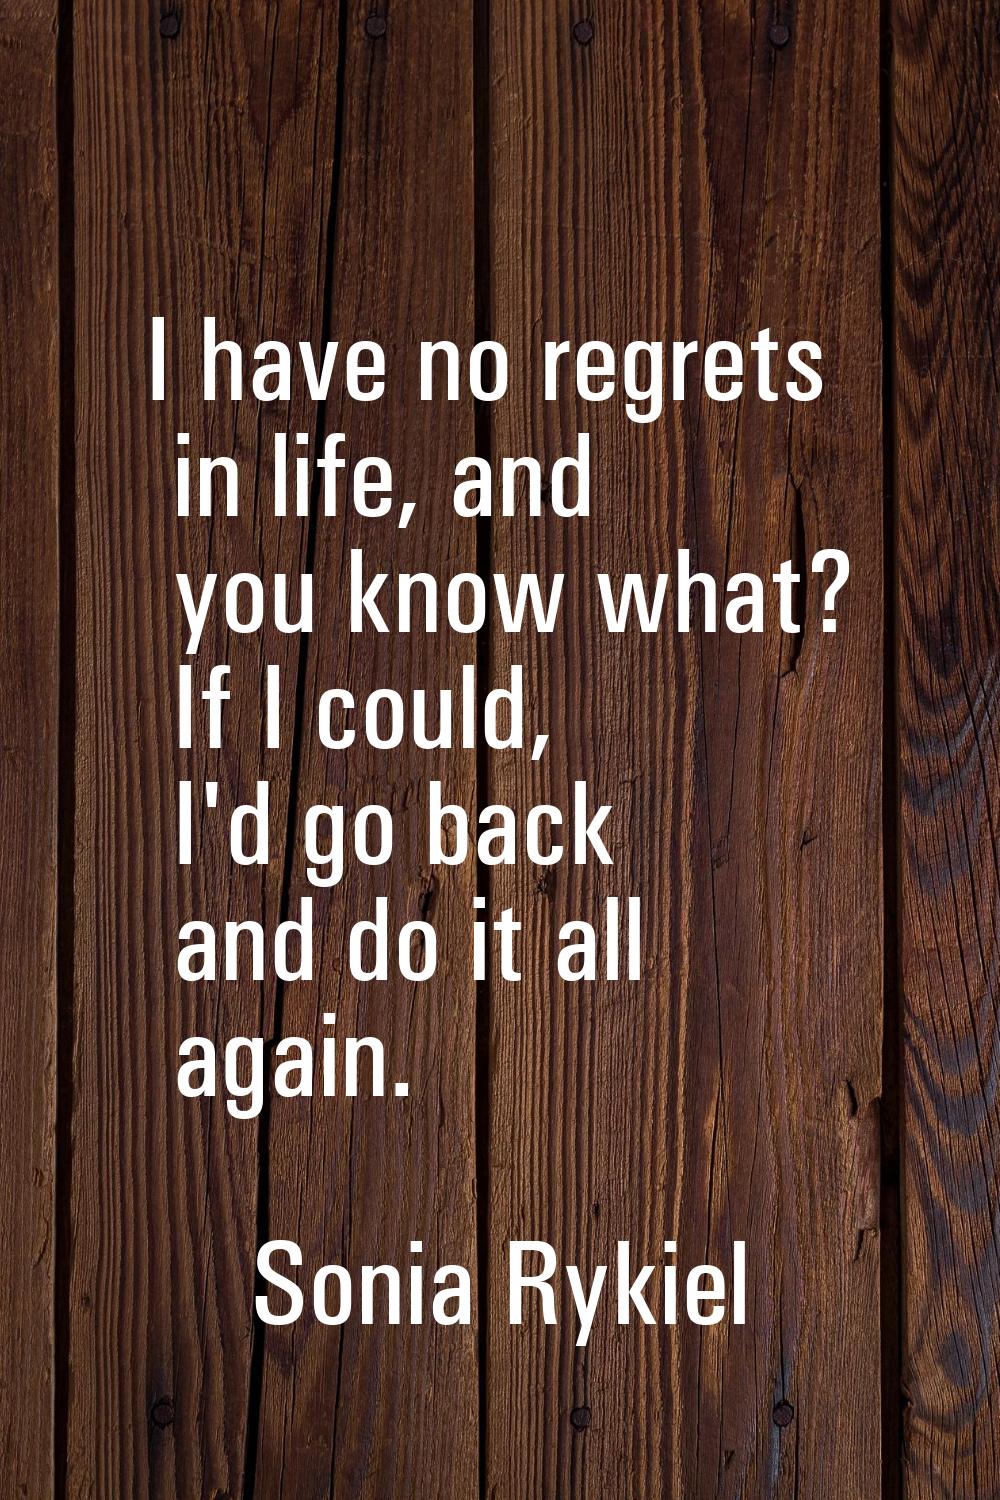 I have no regrets in life, and you know what? If I could, I'd go back and do it all again.